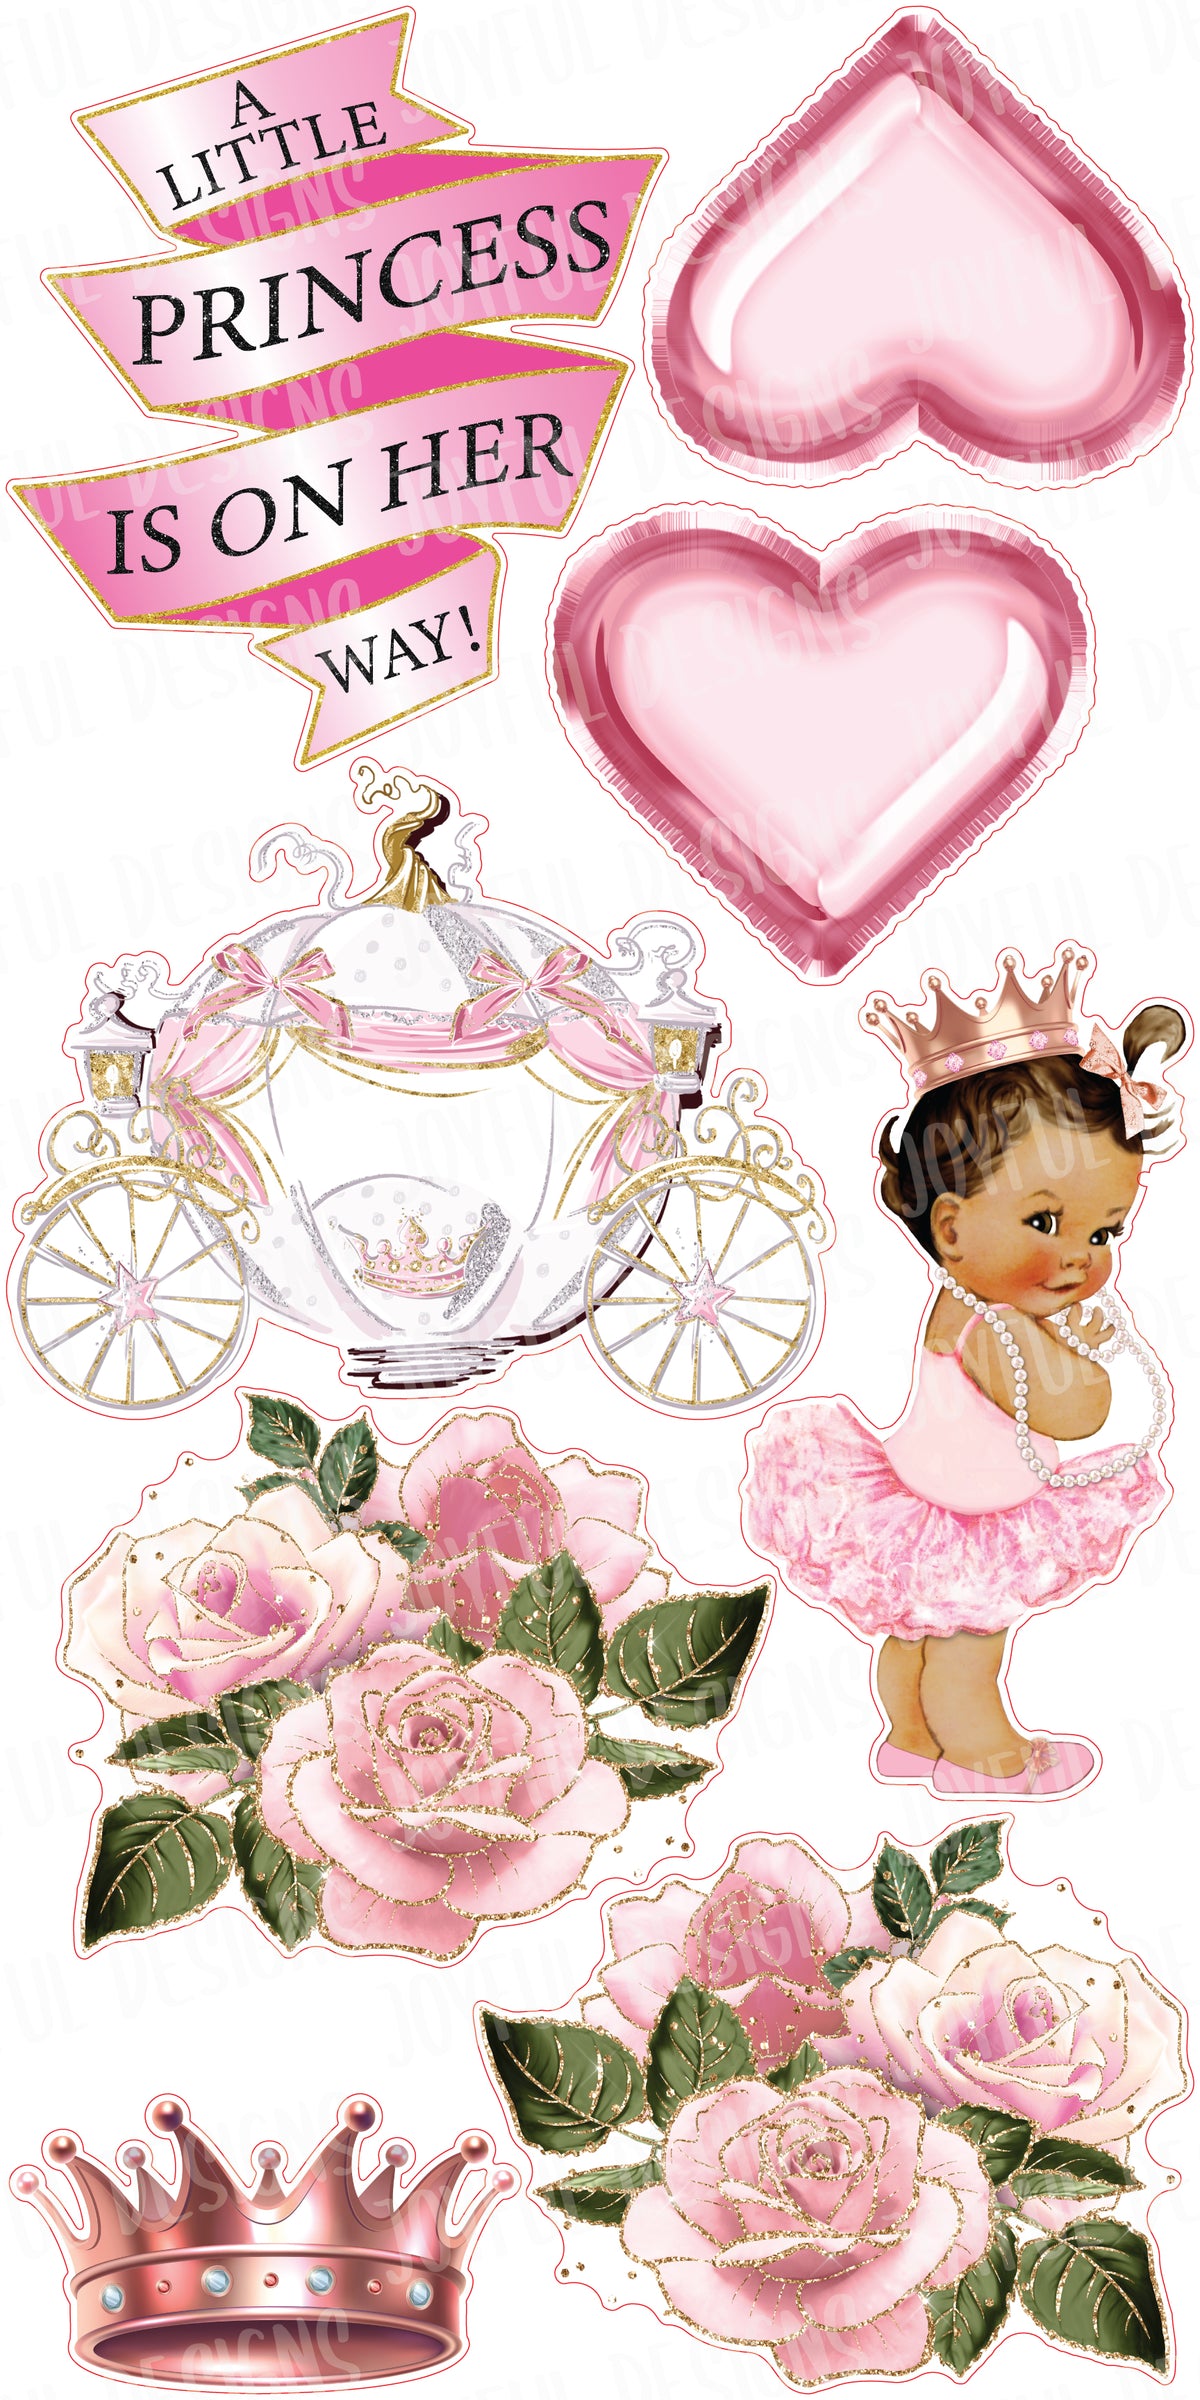 "A Little Princess is on Her Way!" Vertical Centerpiece and Princess Flair